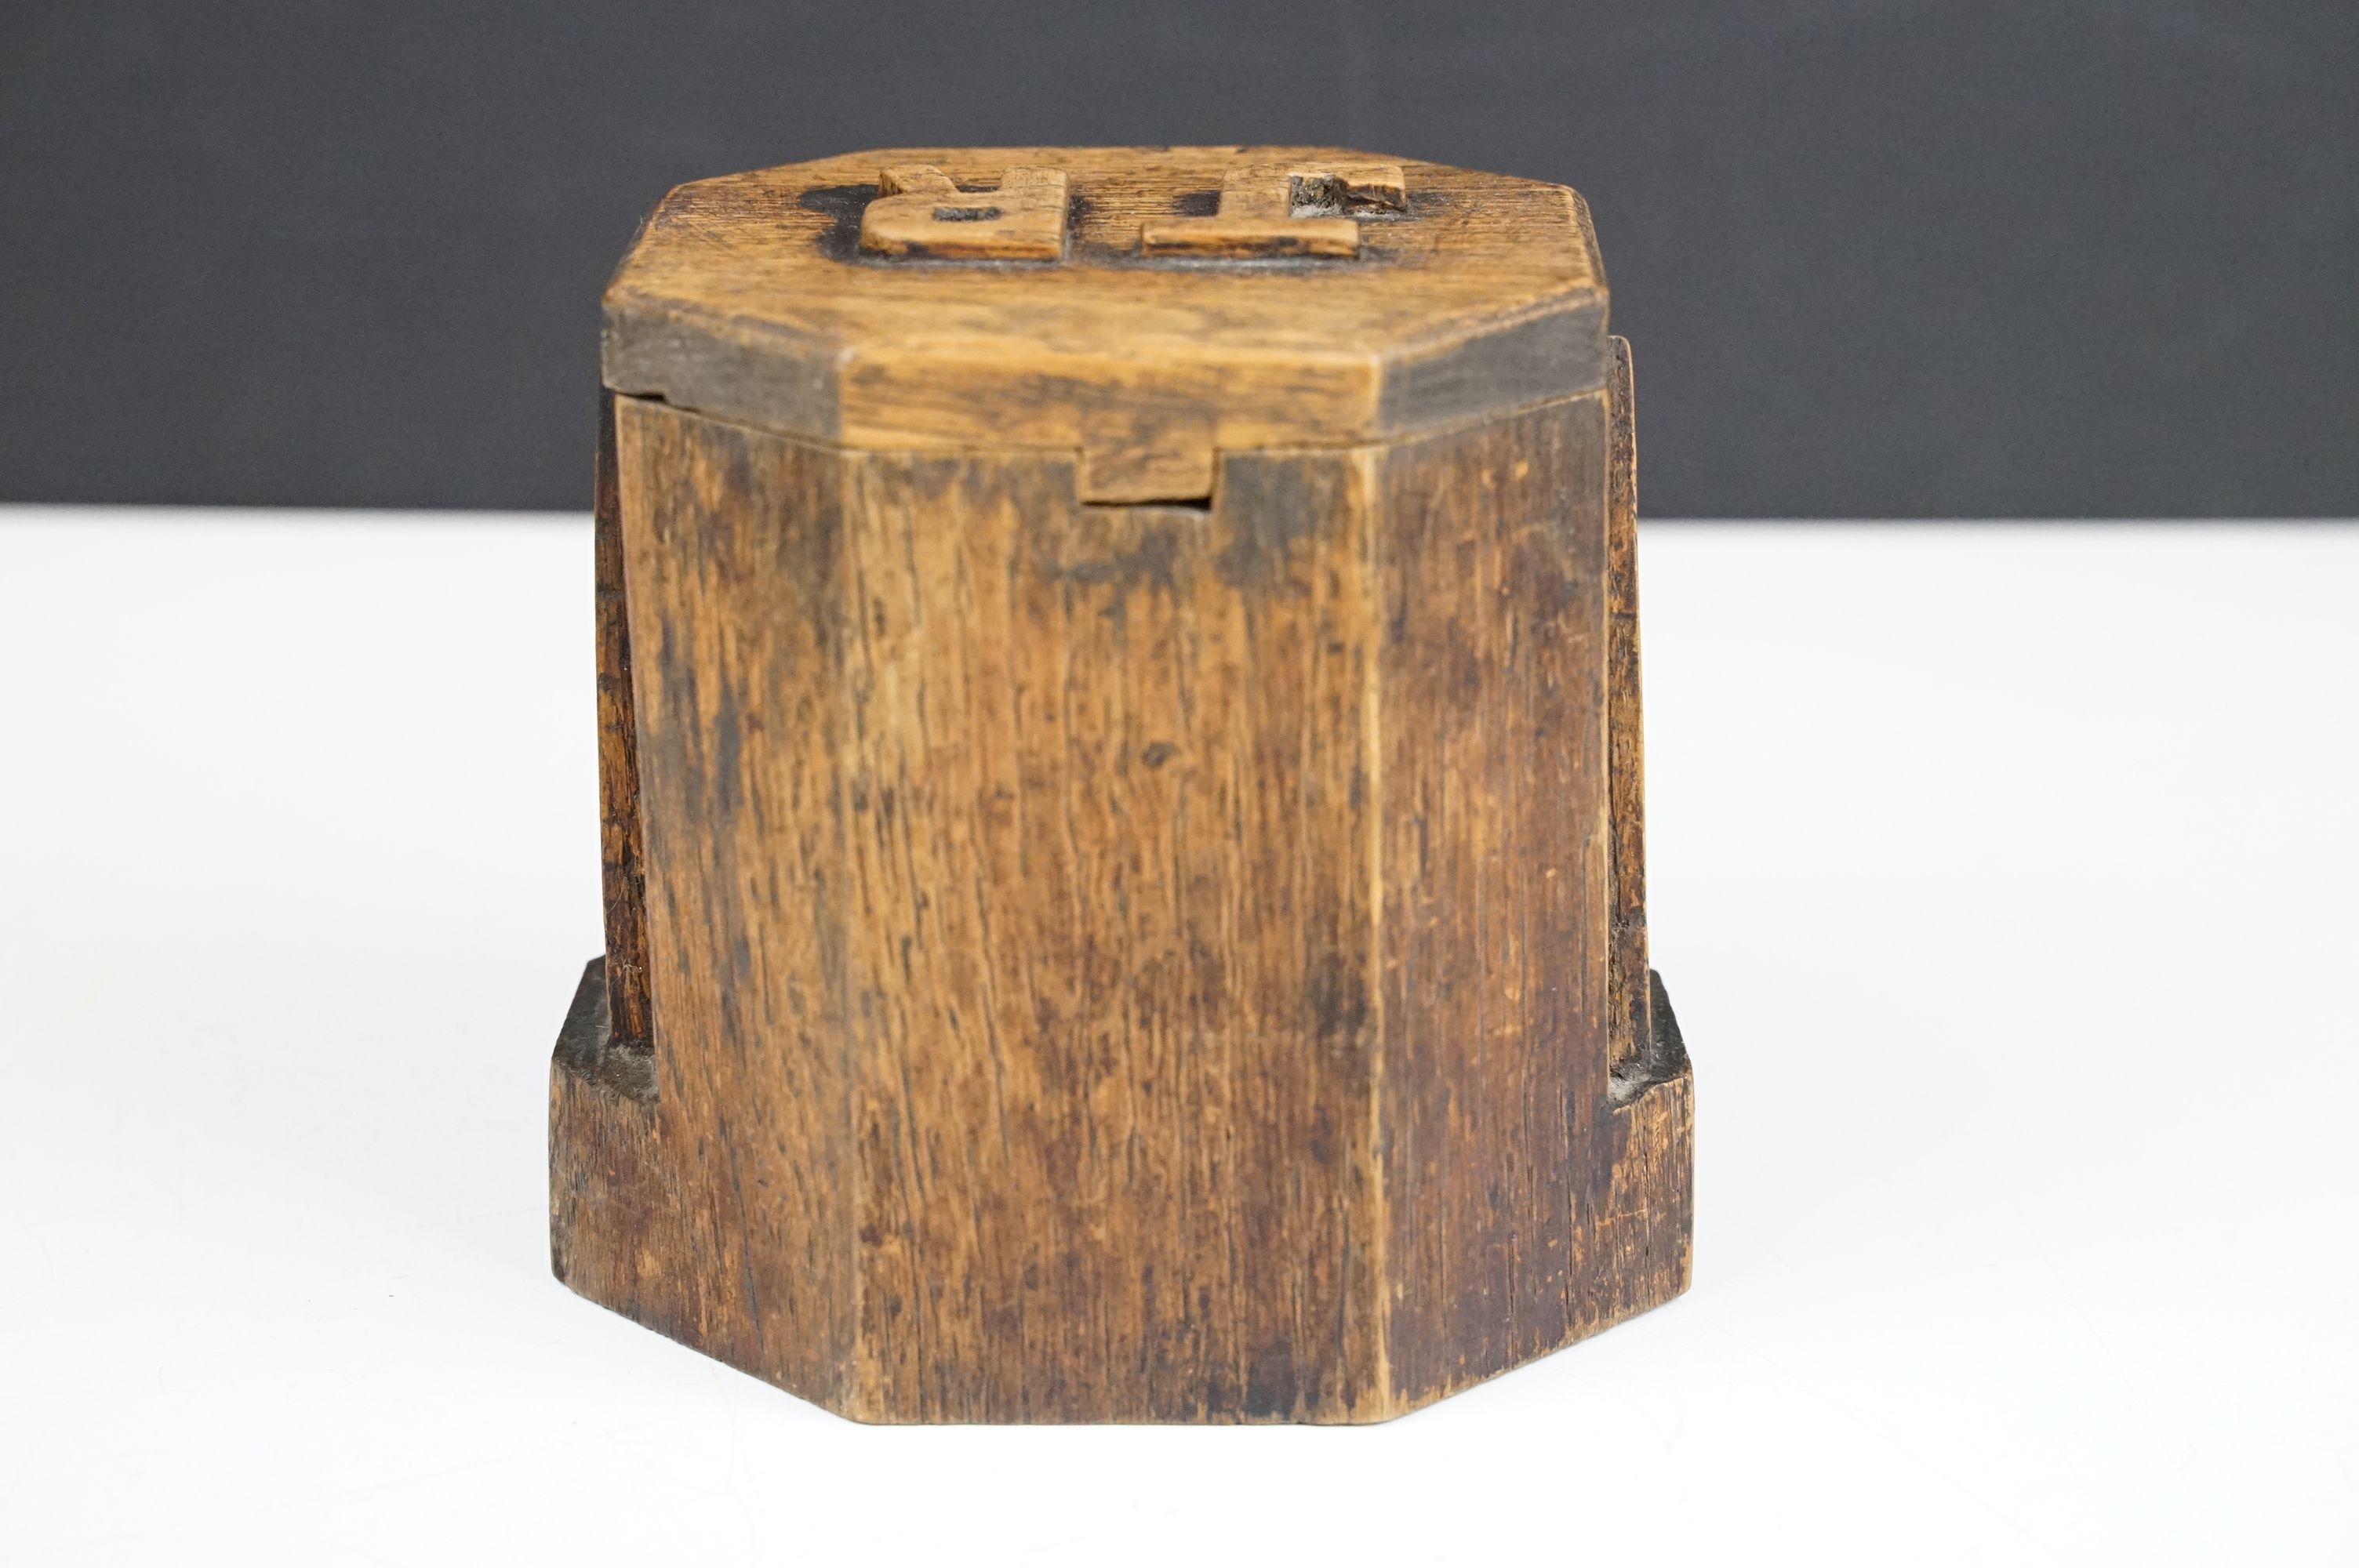 Early-to-mid 20th C tobacco jar with 'JR' initials to lid and Art Deco geometric detail, approx 11cm - Image 4 of 7